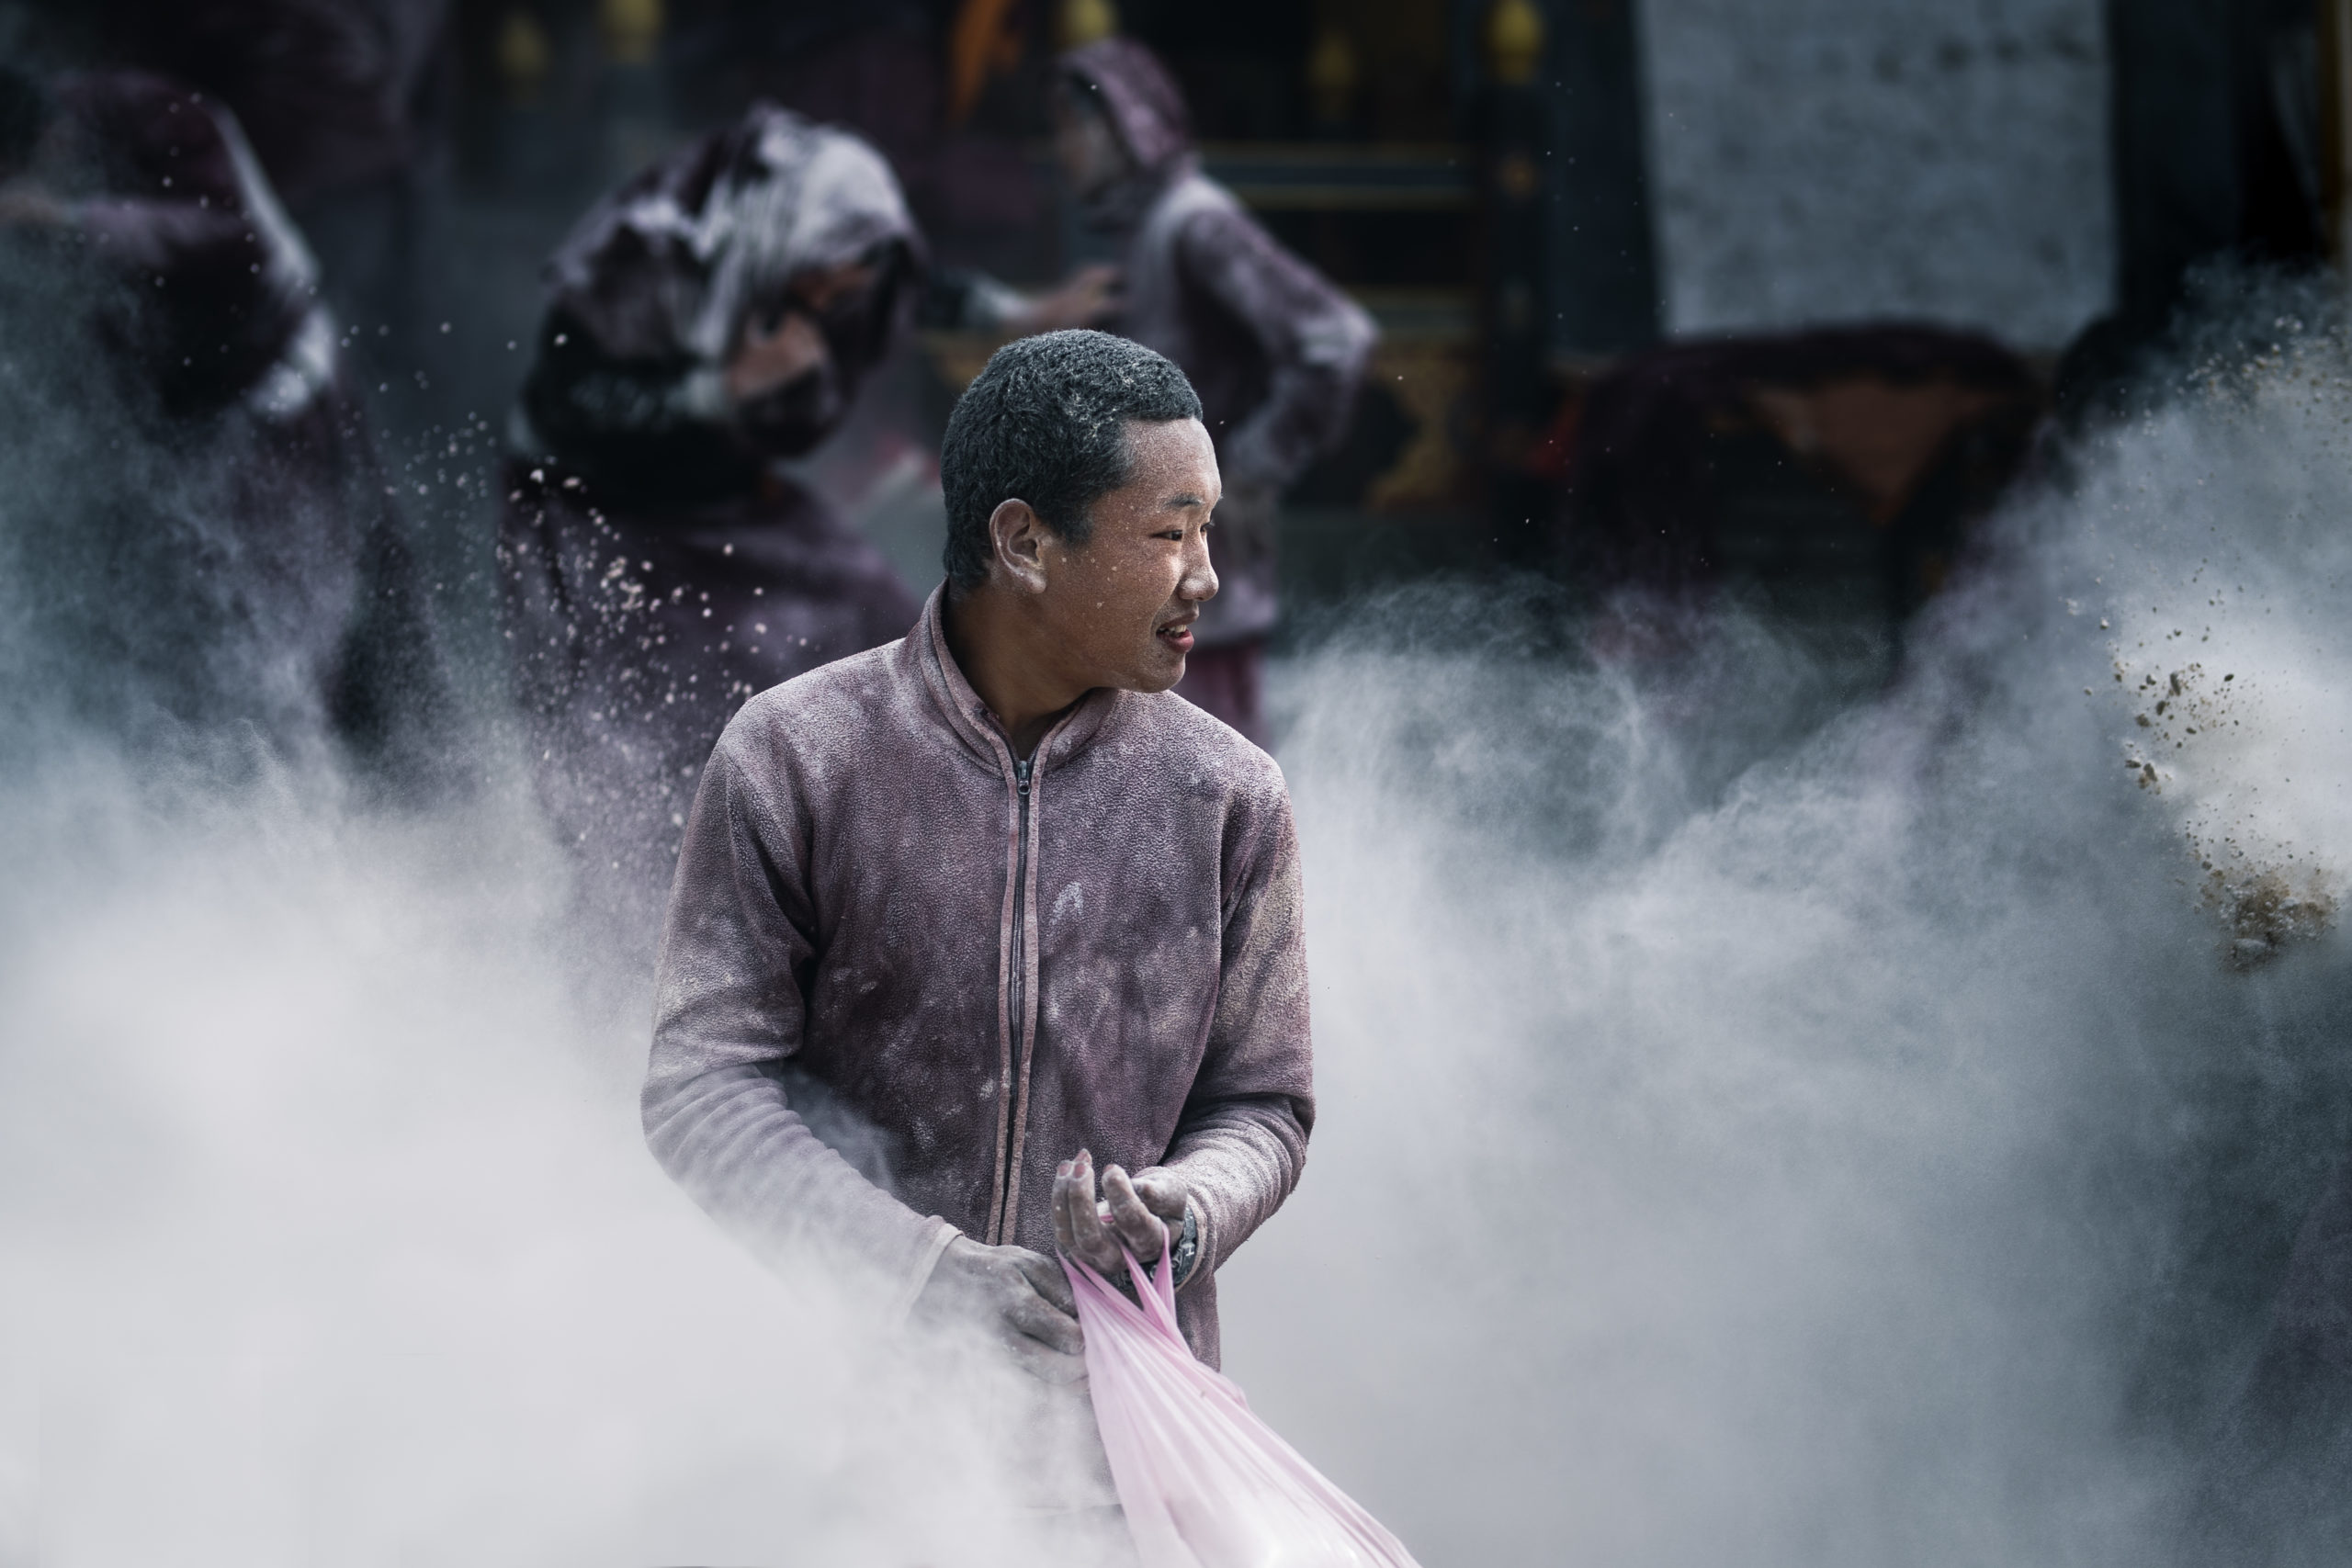 A Bhutanese monk celebrating the Losar Festival in Bhutan by throwing flour